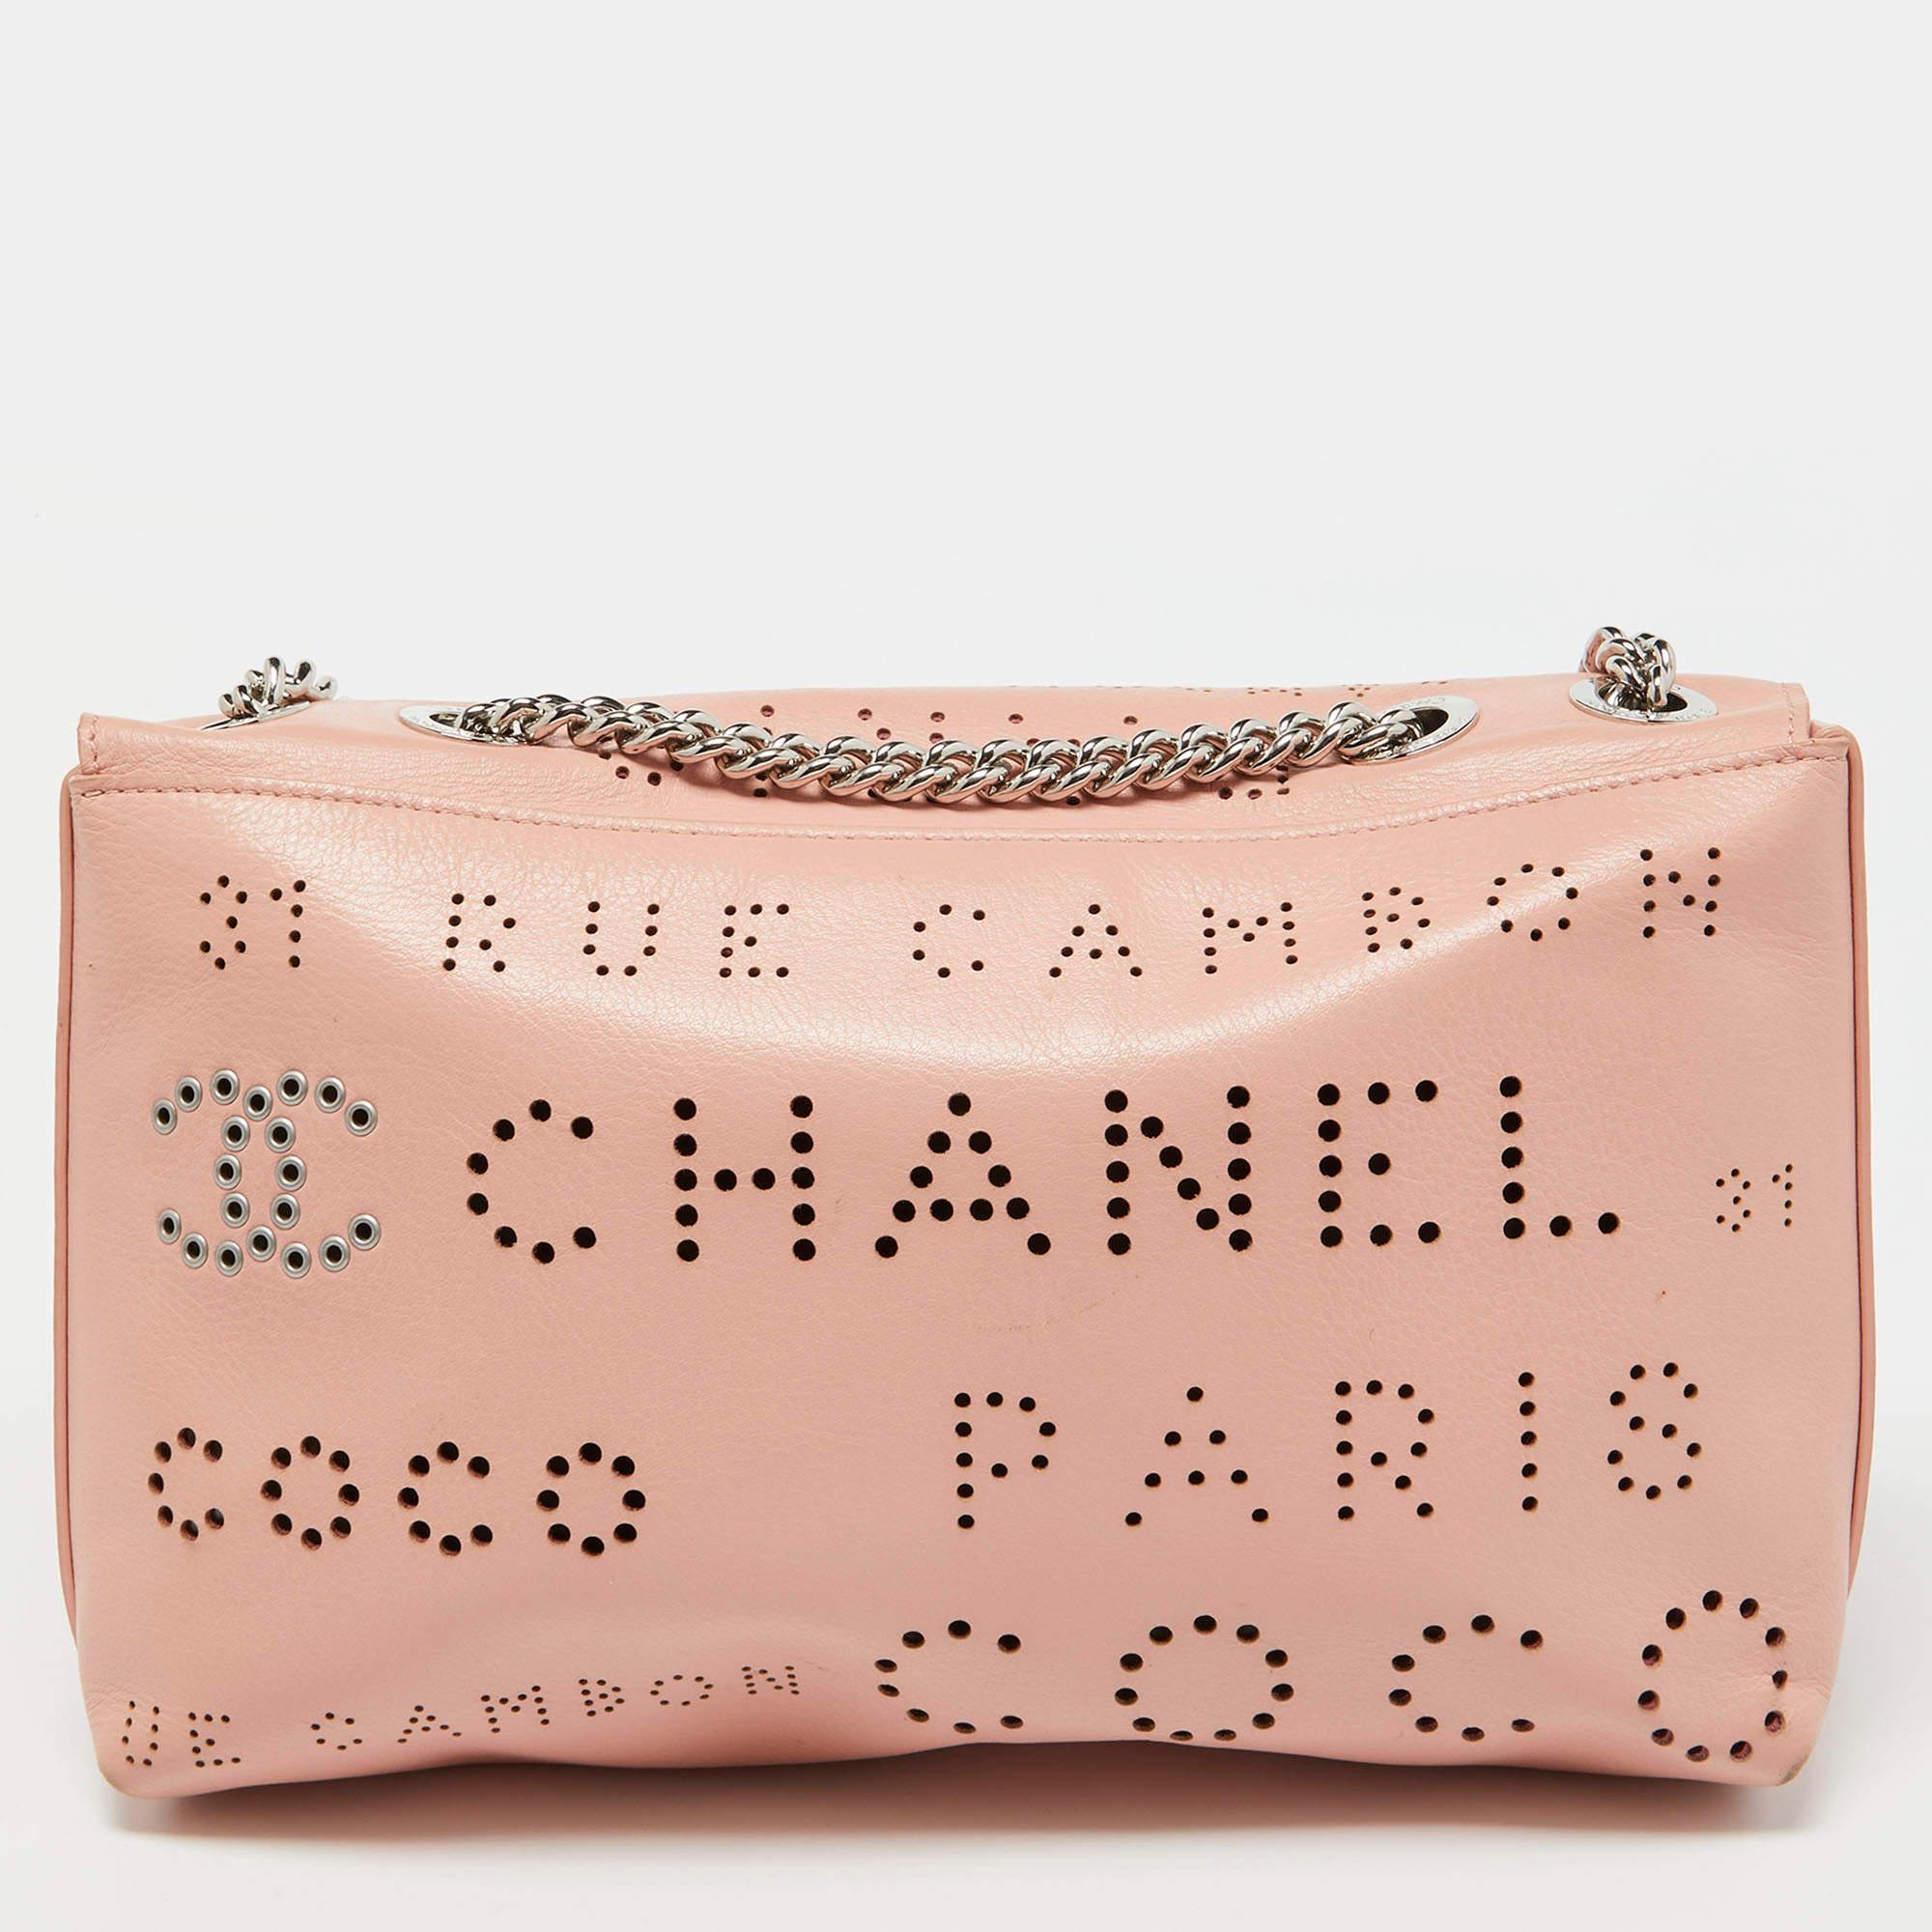 Chanel Light Pink Leather Perforated Logo Flap Bag 2